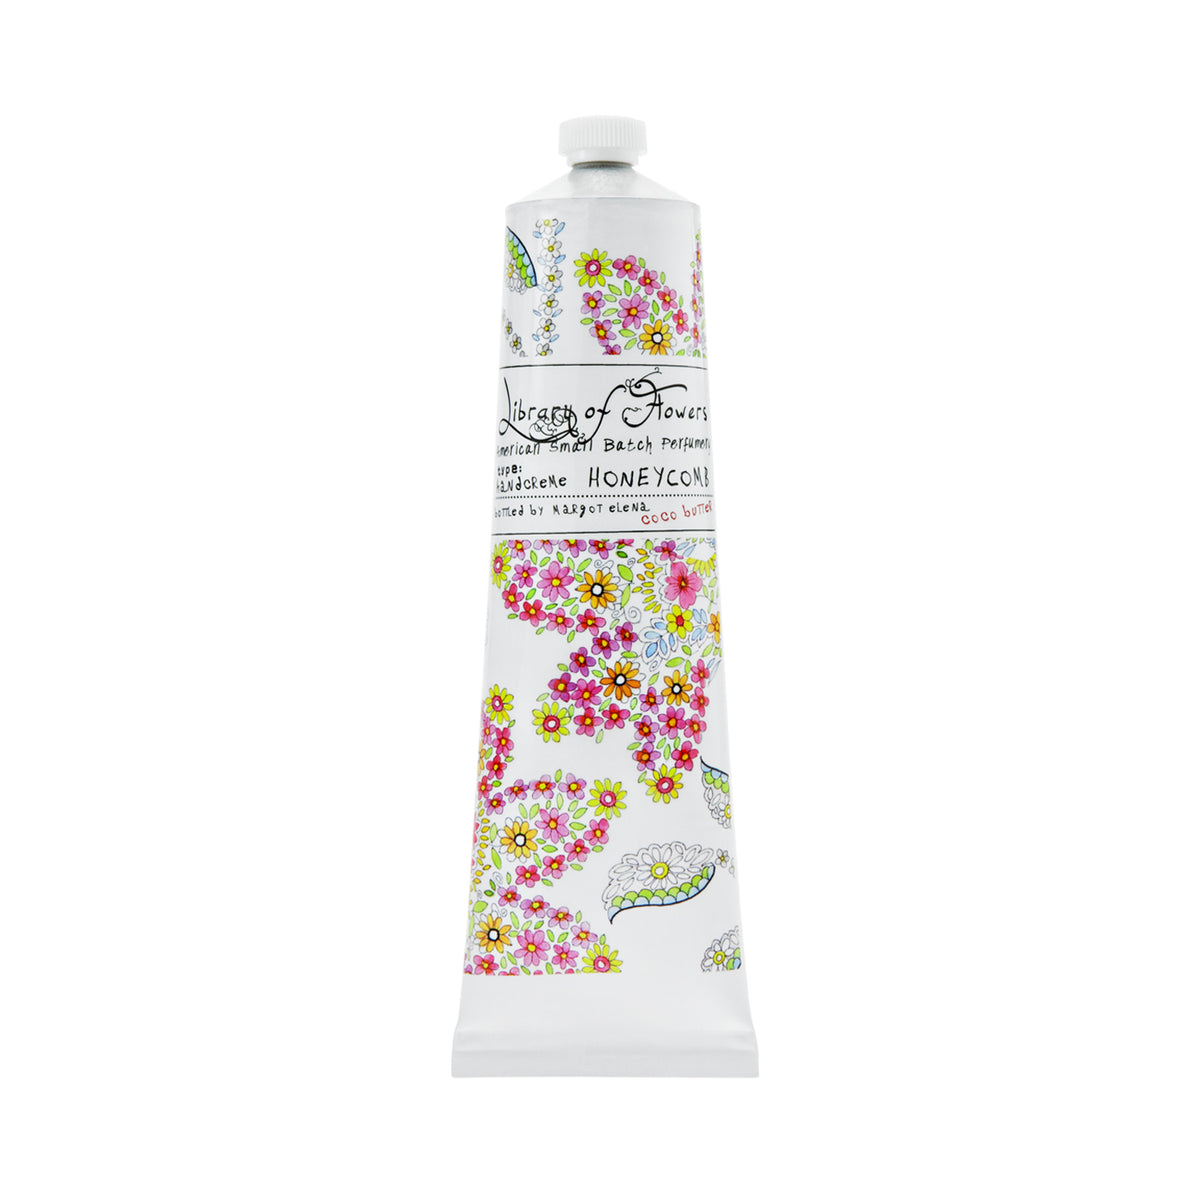 Library of Flowers Honeycomb Hand Creme